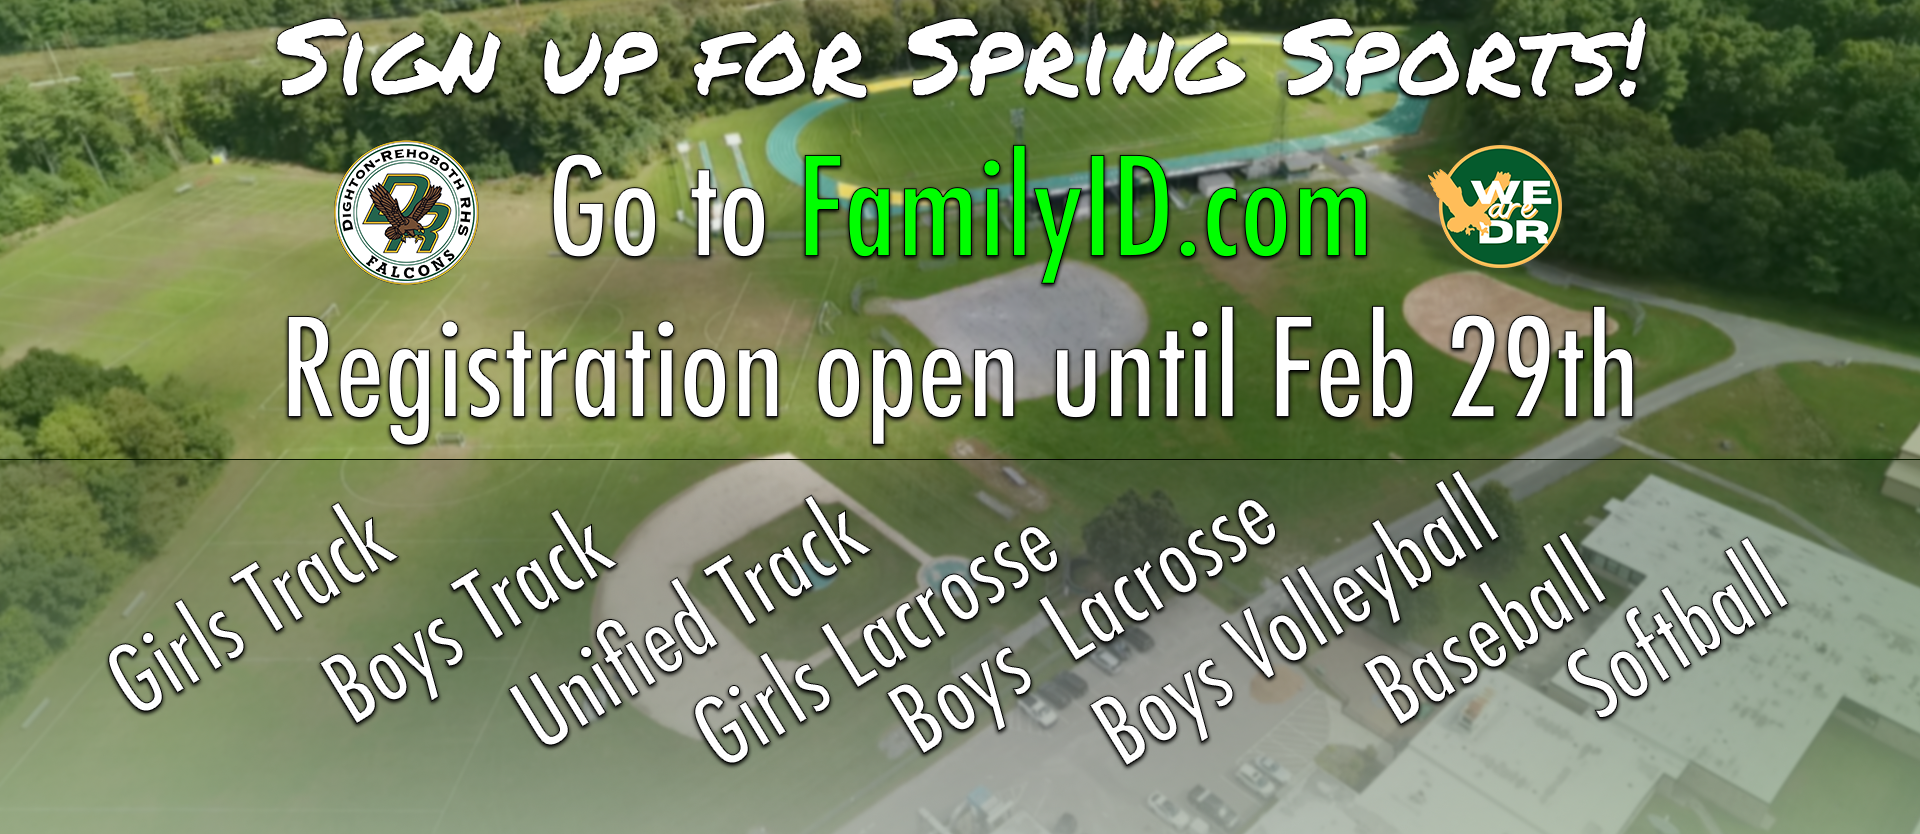 Spring Sports signups